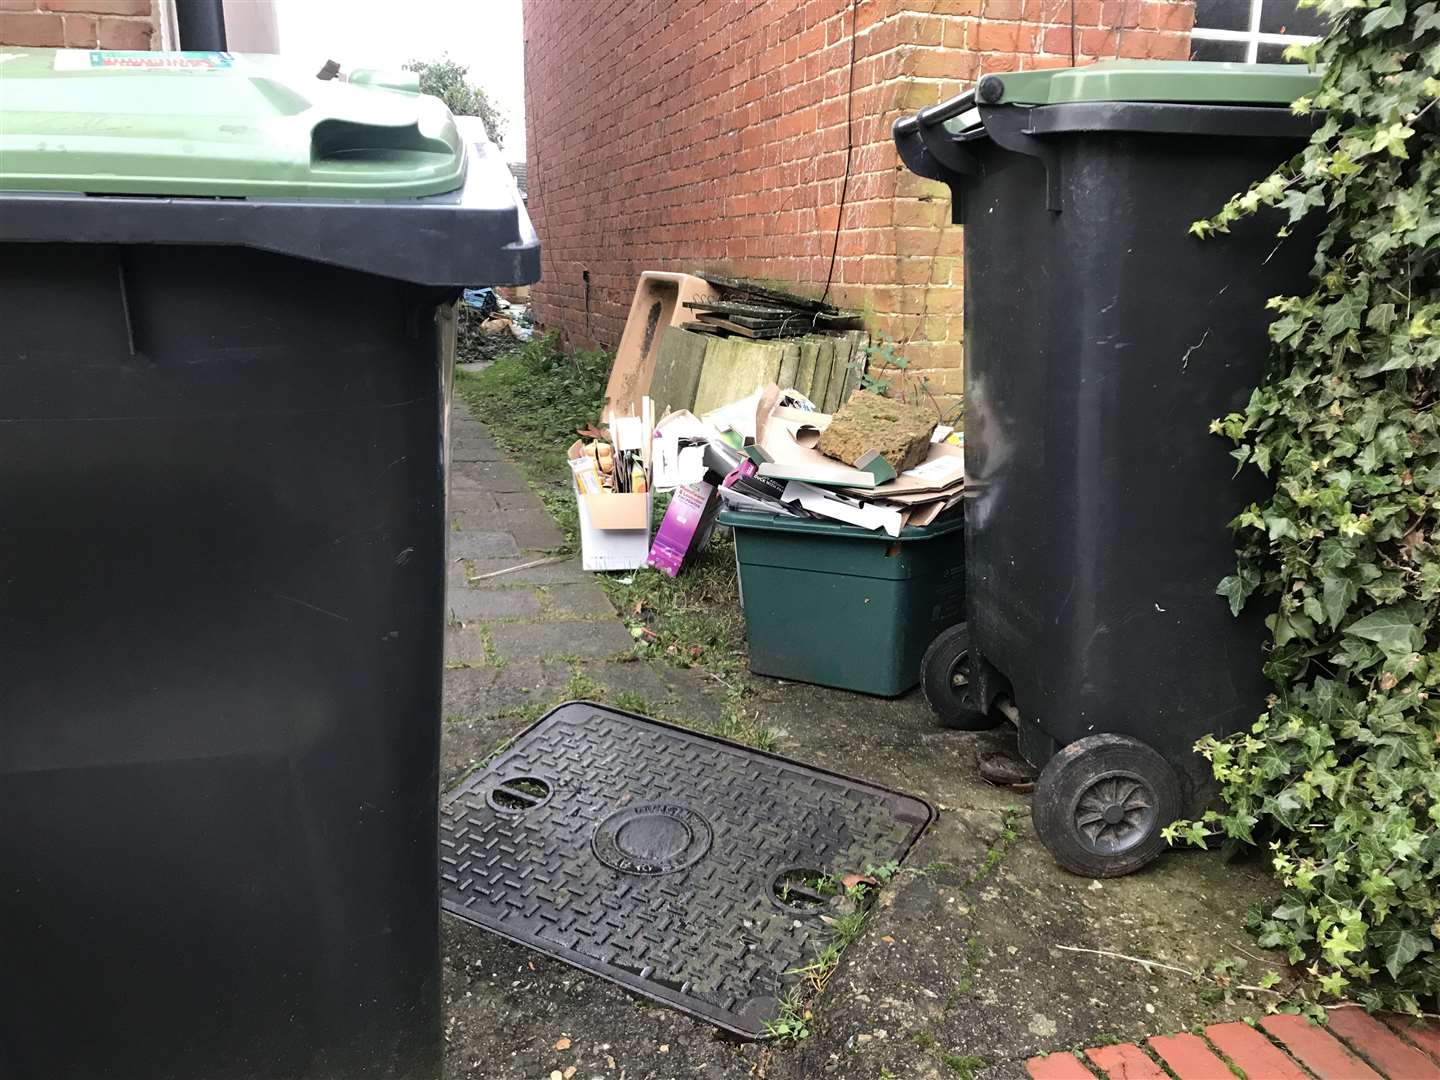 Rubbish was left outside for weeks